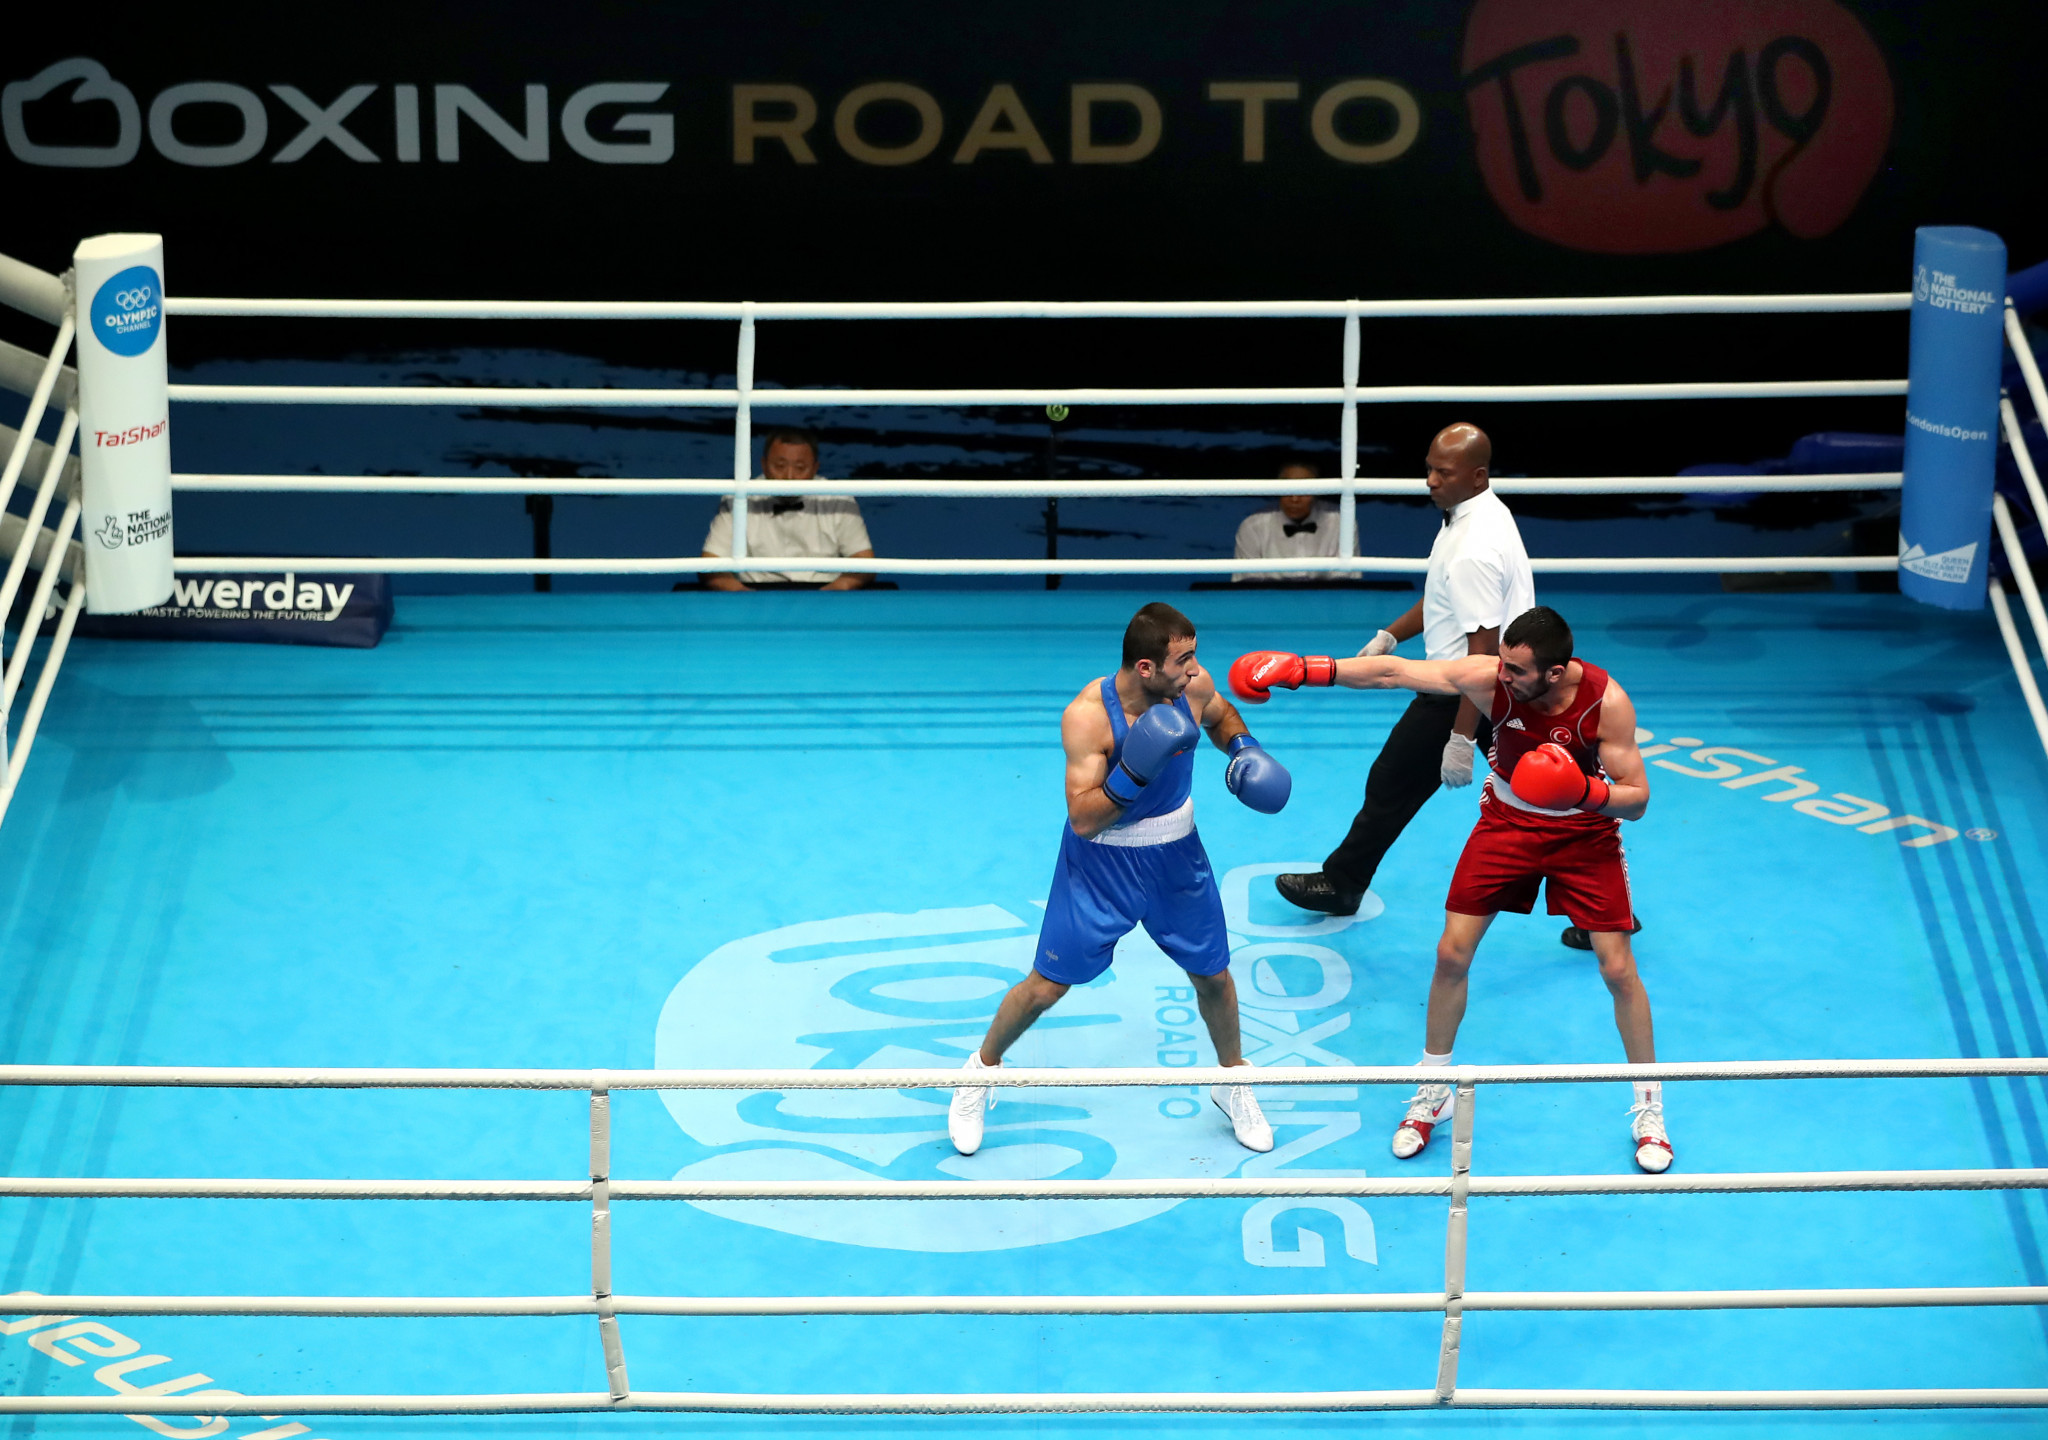 Turkey blames IOC for AIBA exclusion after six claimed to have contracted coronavirus at London qualifier